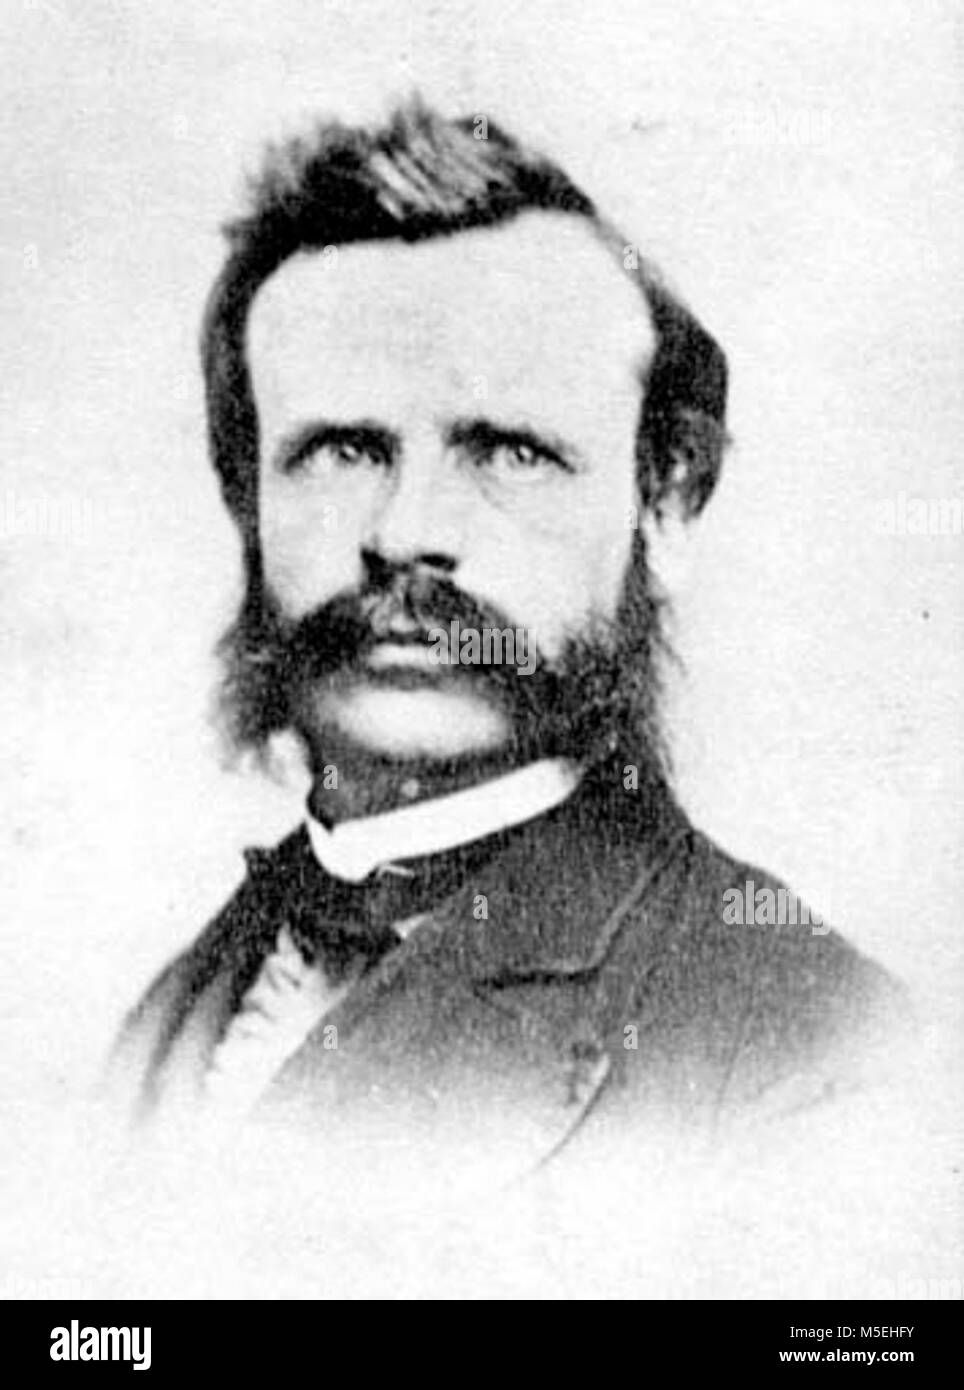 Grand Canyon Powell Expedition   Formal portrait of John Wesley Powell. With mustache only. No beard. Age 35. Circa 1869. Grand Canyon National Park Stock Photo